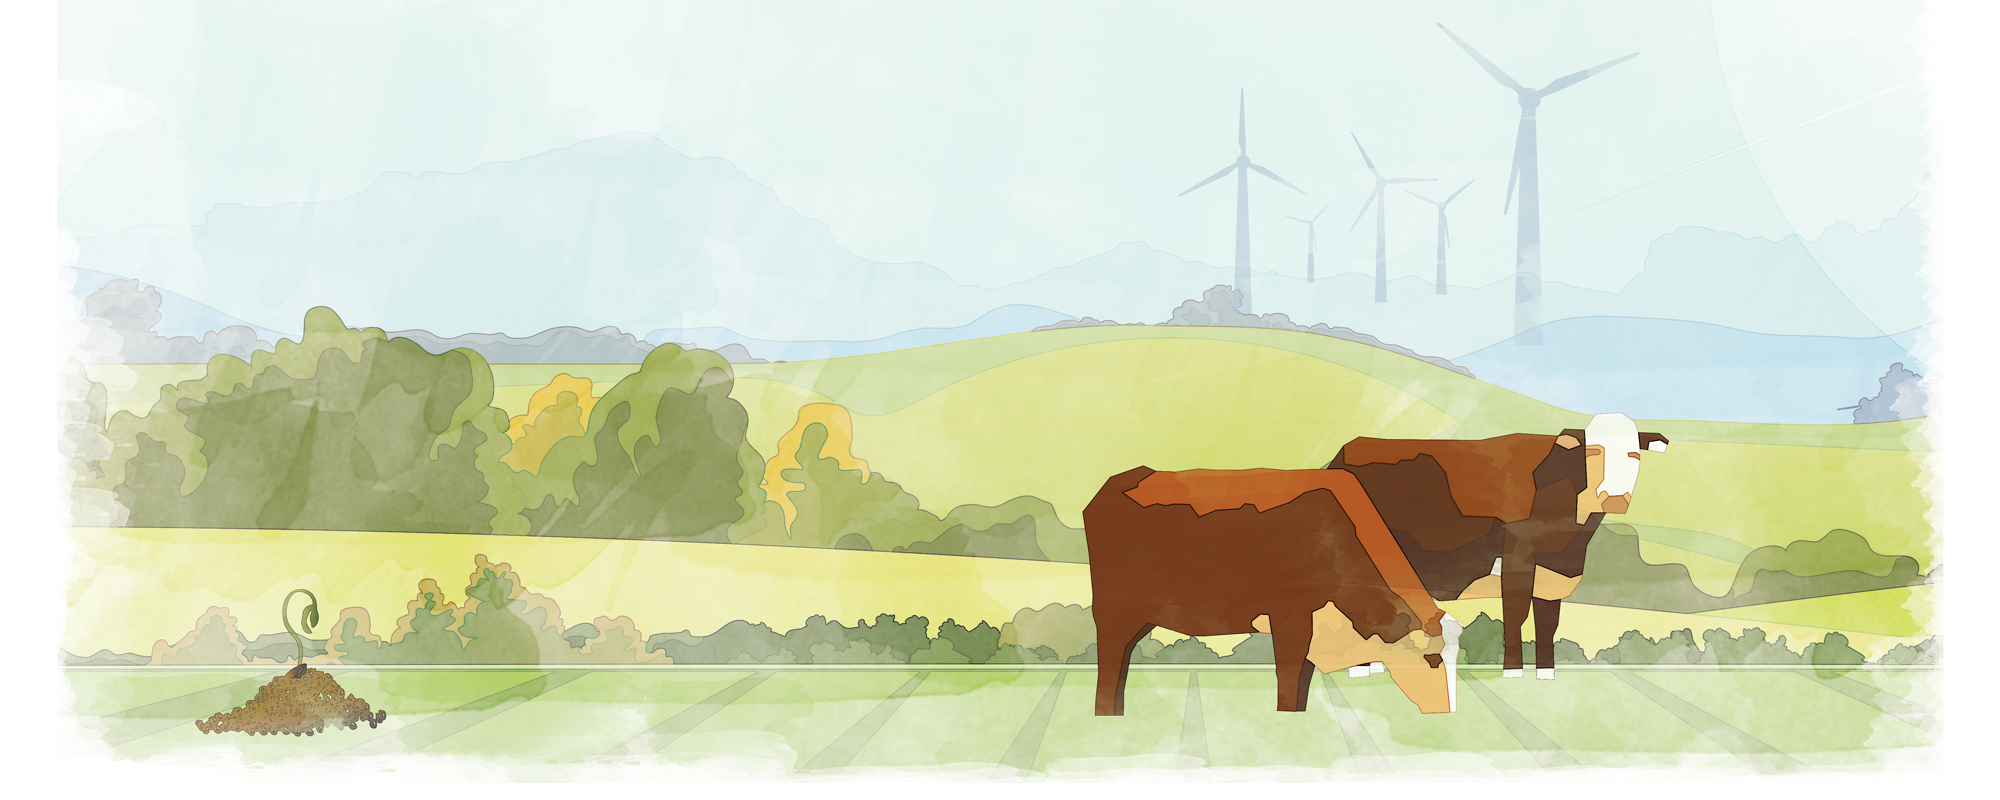 Illustration: Cattle grazing in pasture with windmills and hills in background